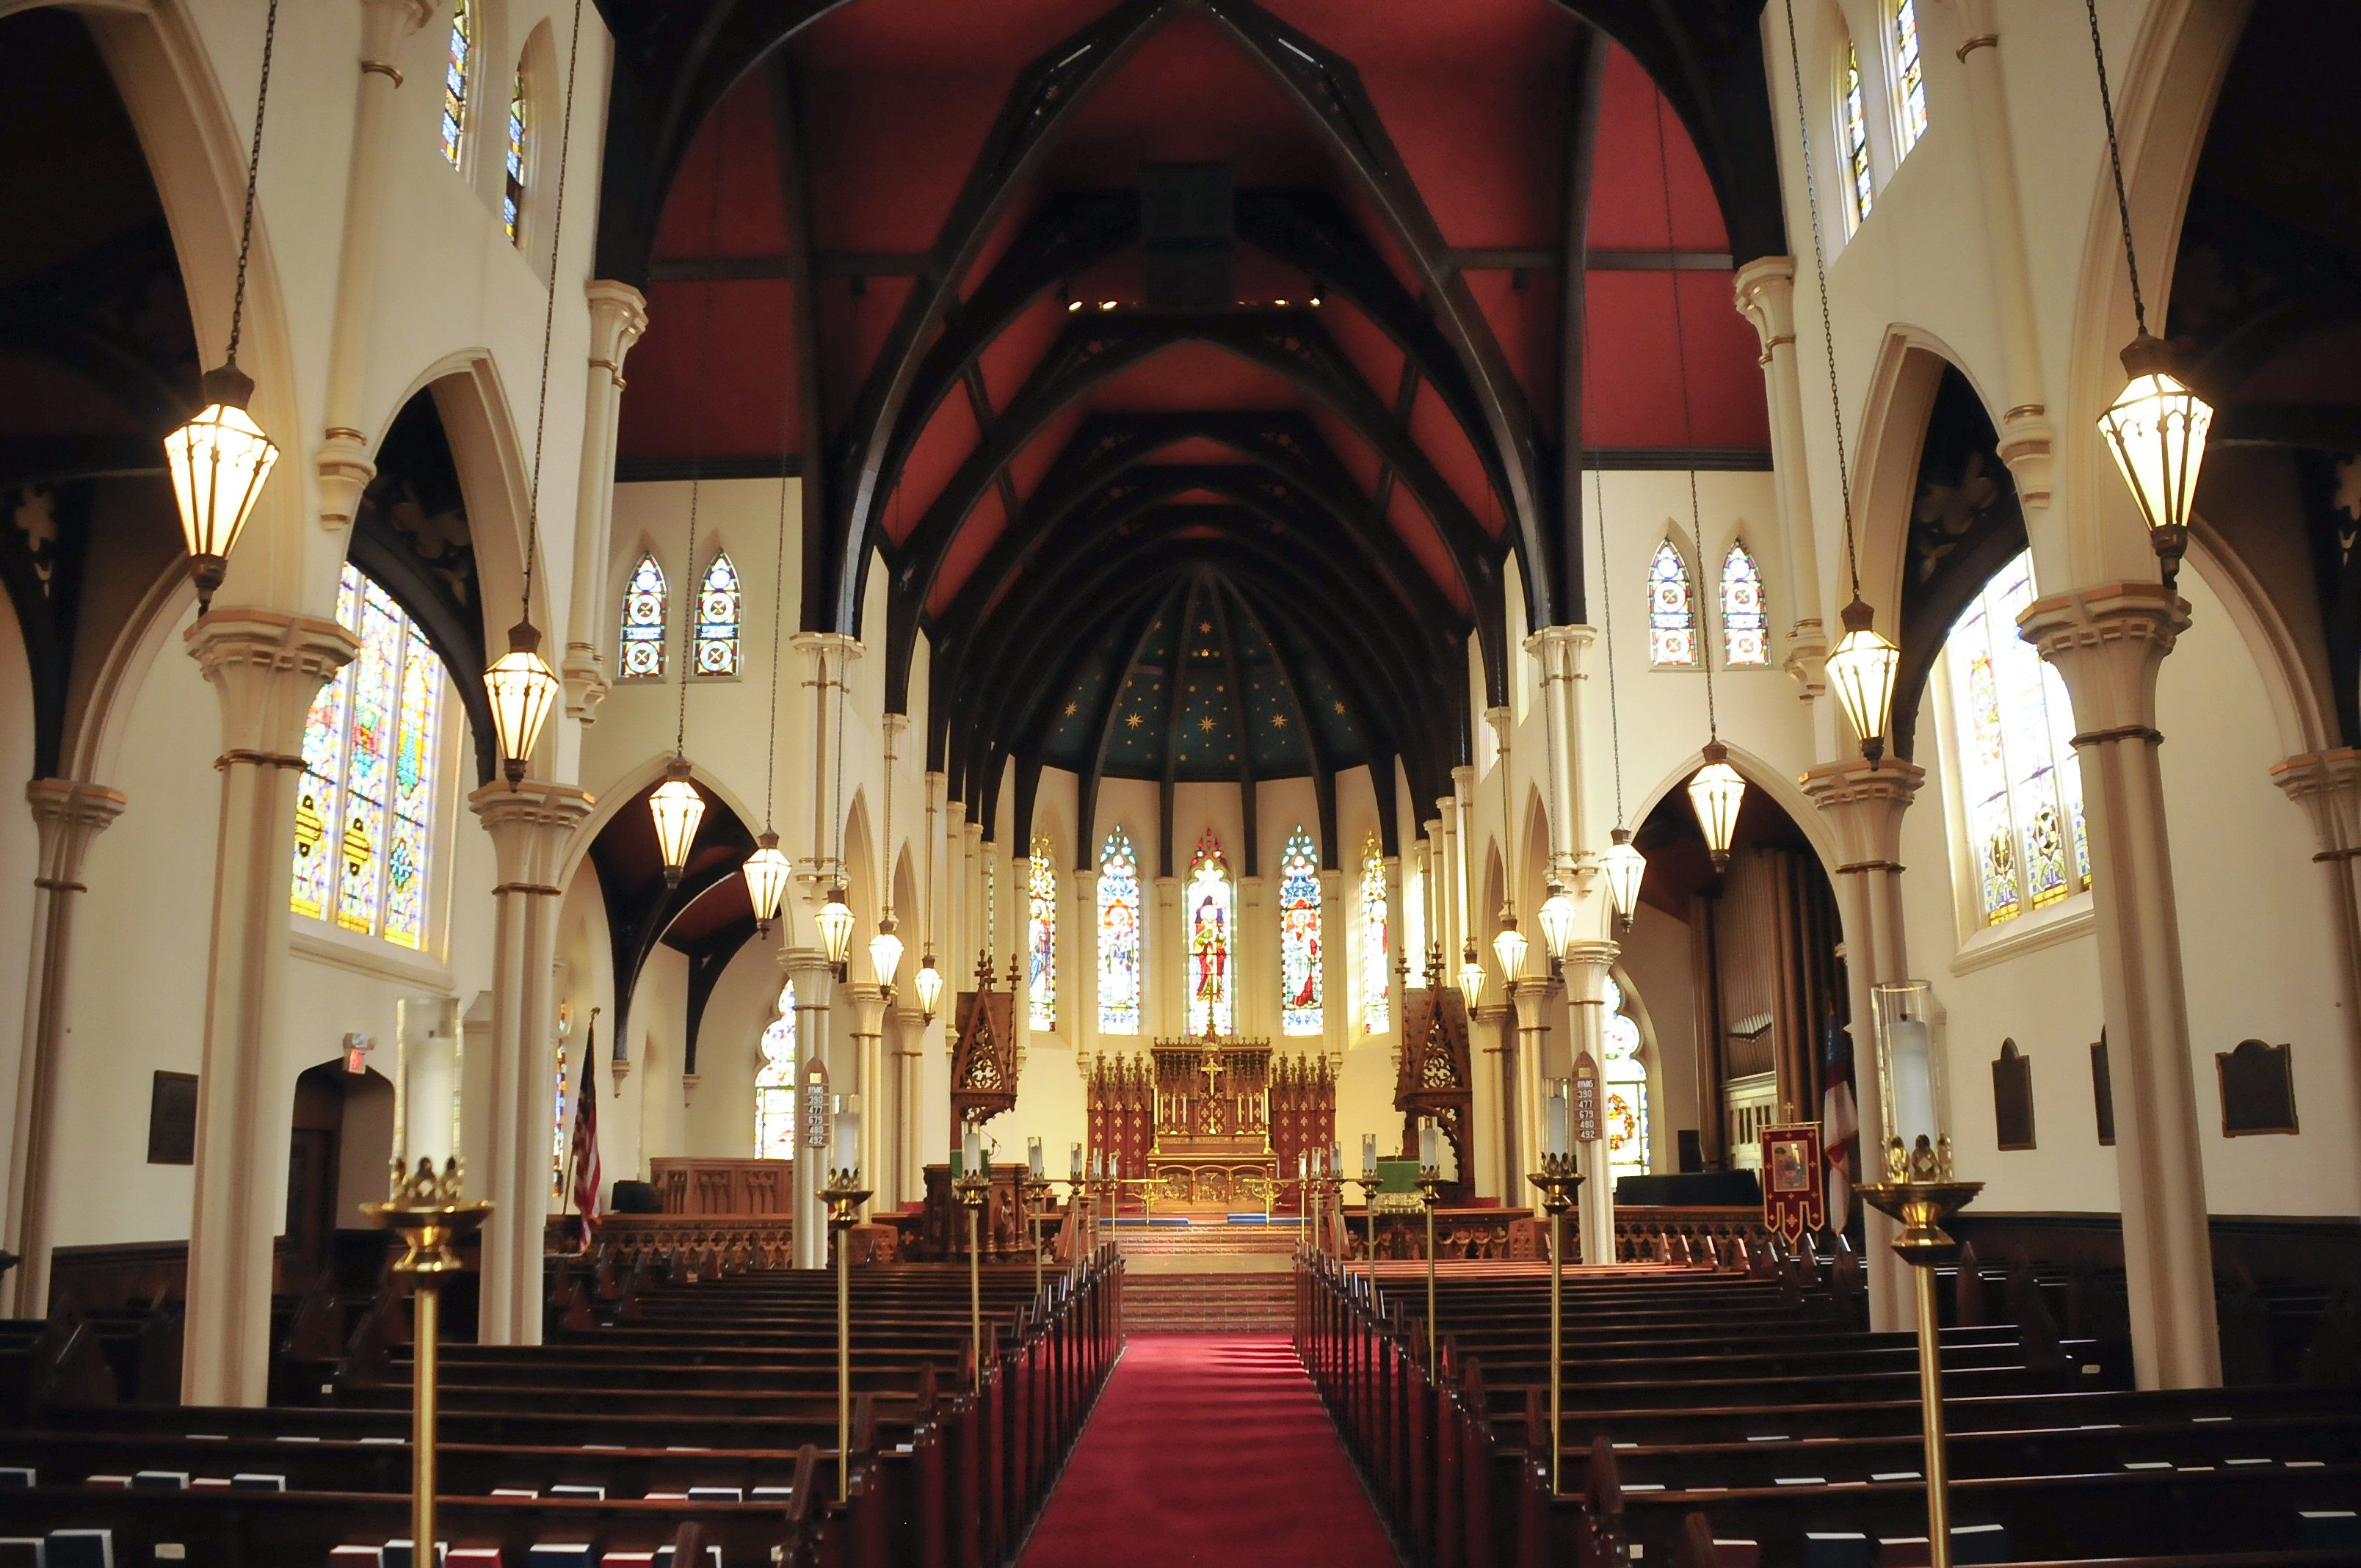 The interior of Trinity Episcopal Cathedral.